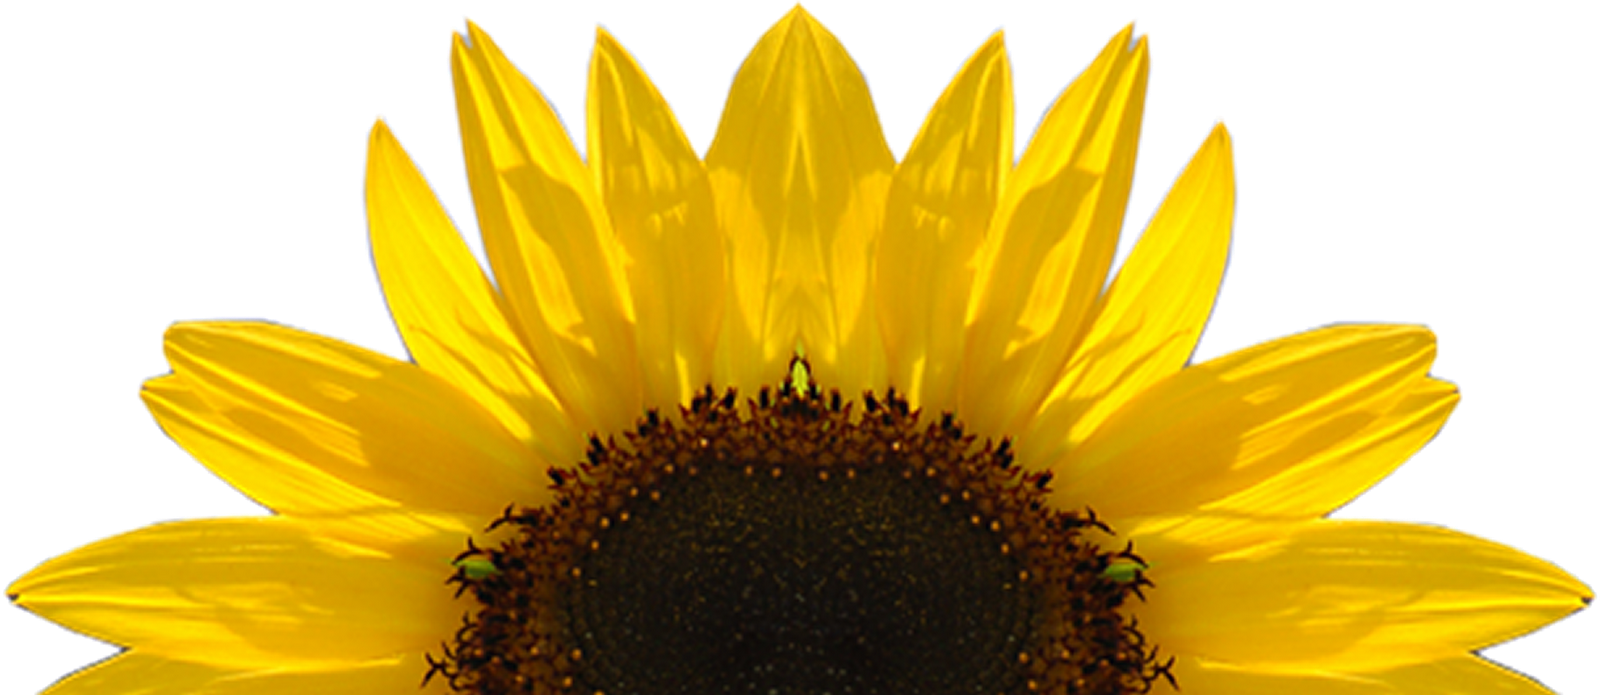 Sunflower  free sunflower clipart half pencil and in color sunflower